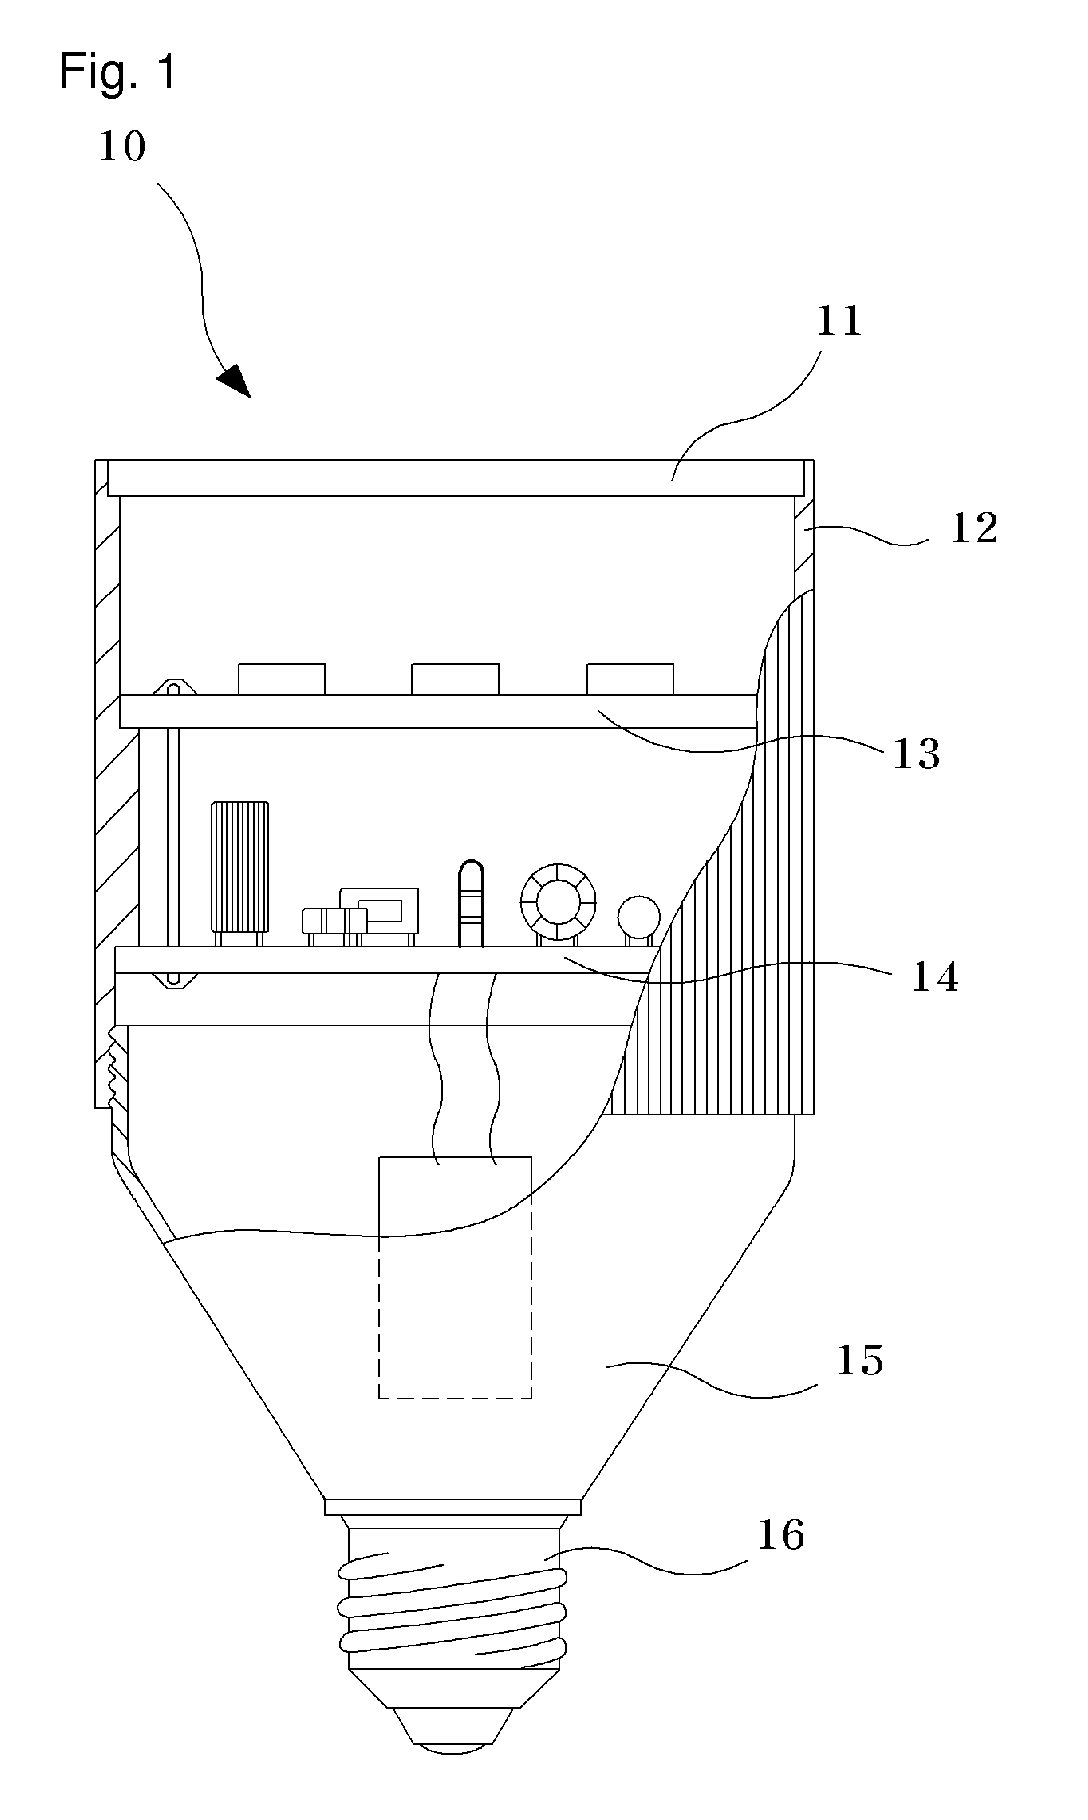 Bulbtype lamp with light emitting diodes using alternating current